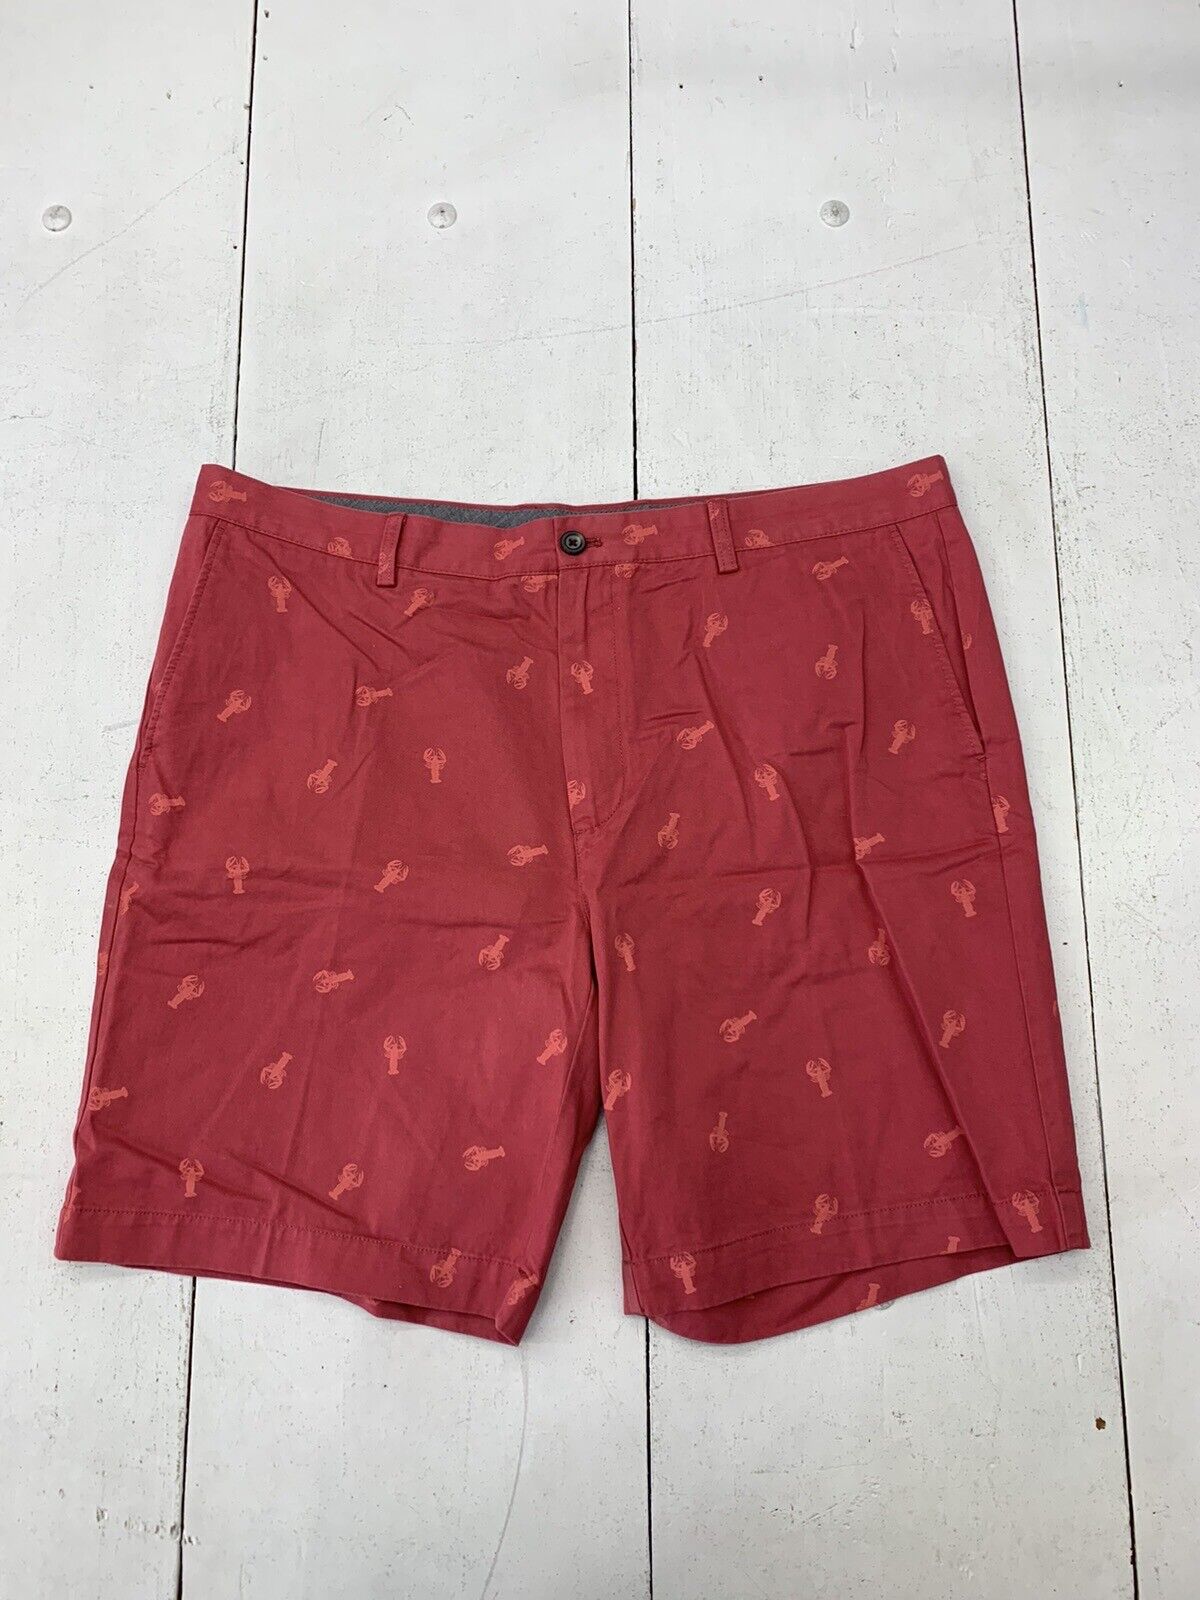 Amazon Essentials Mens Red Lobster Print Slim Fit Shorts Size 42